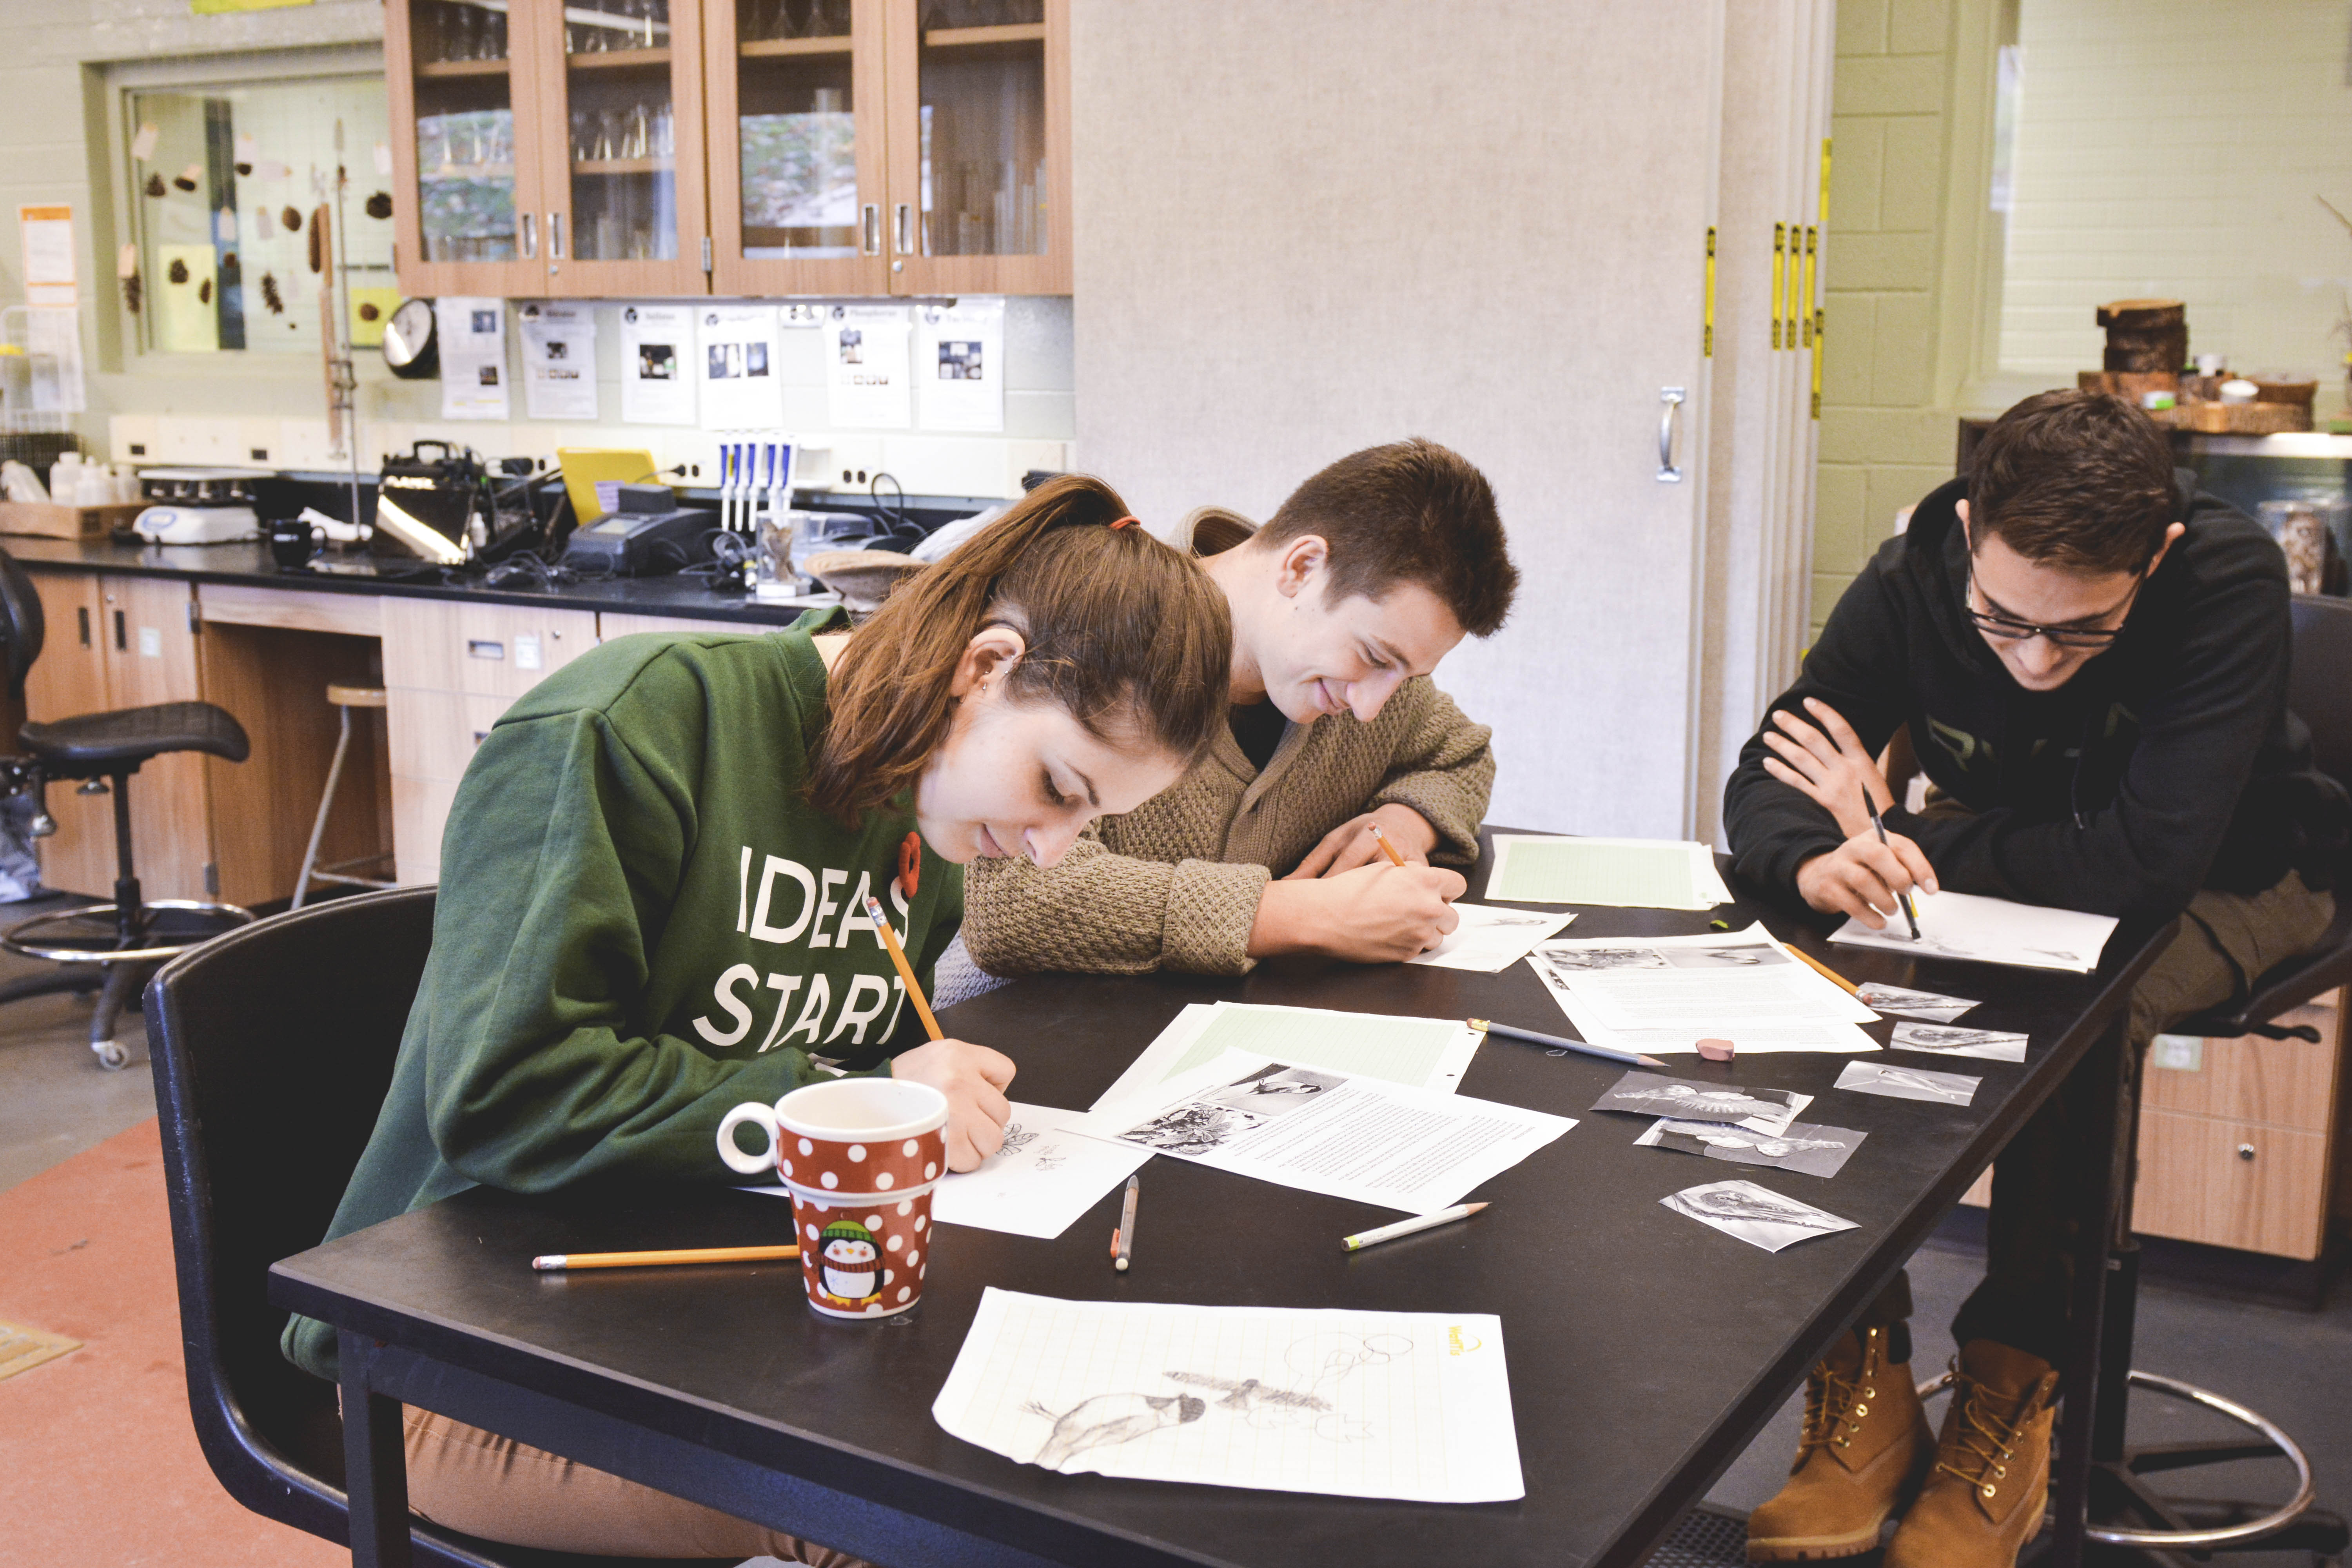 Students learning to sketch. Photo by Ju Hyun Kim